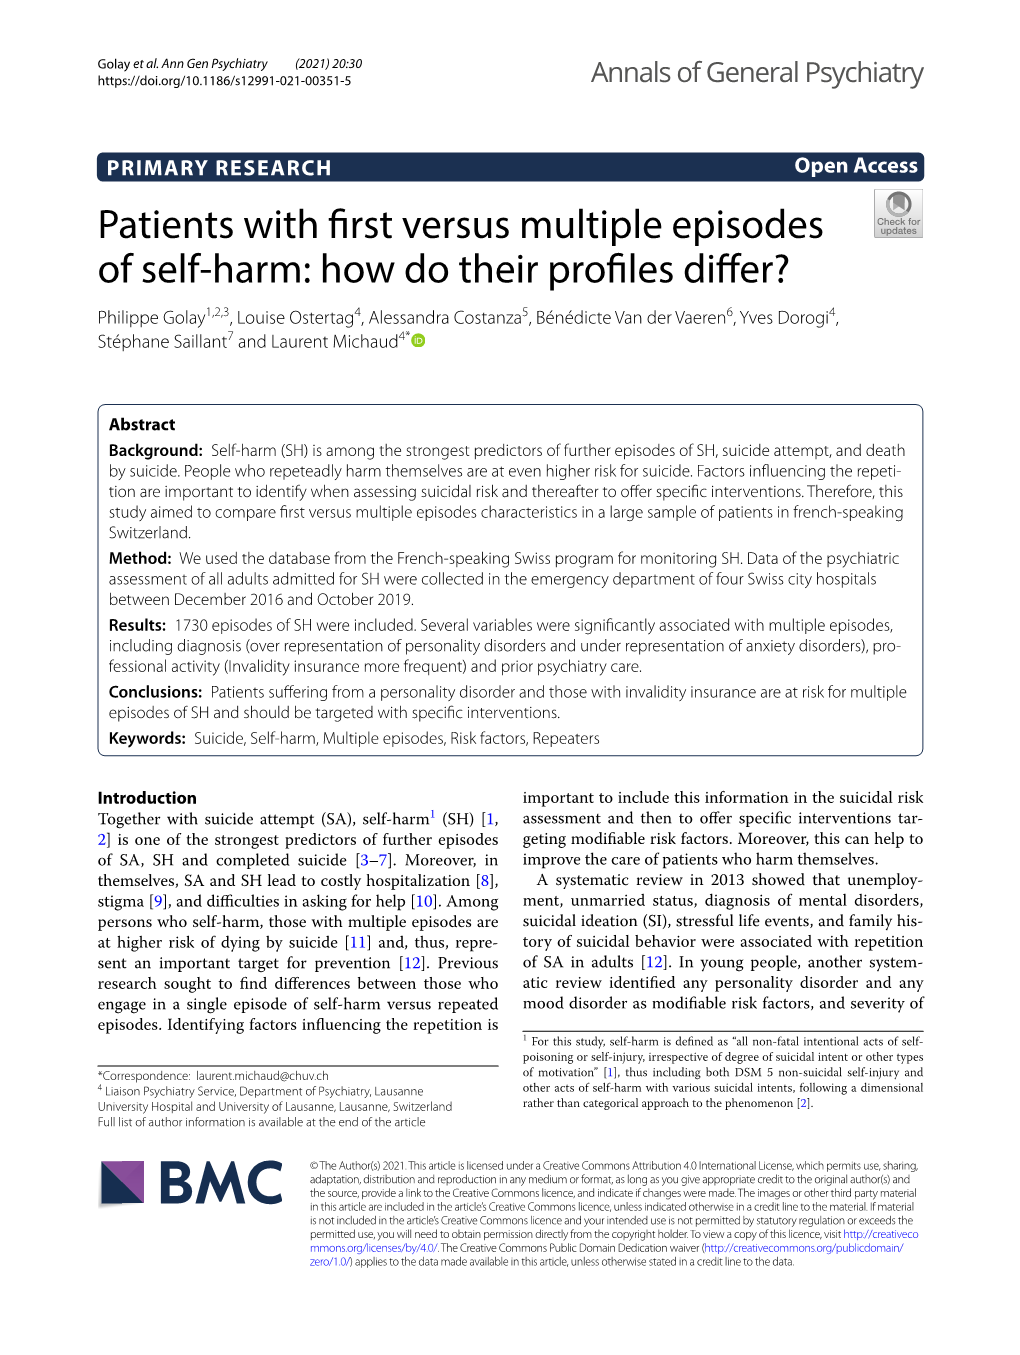 Patients with First Versus Multiple Episodes of Self-Harm: How Do Their